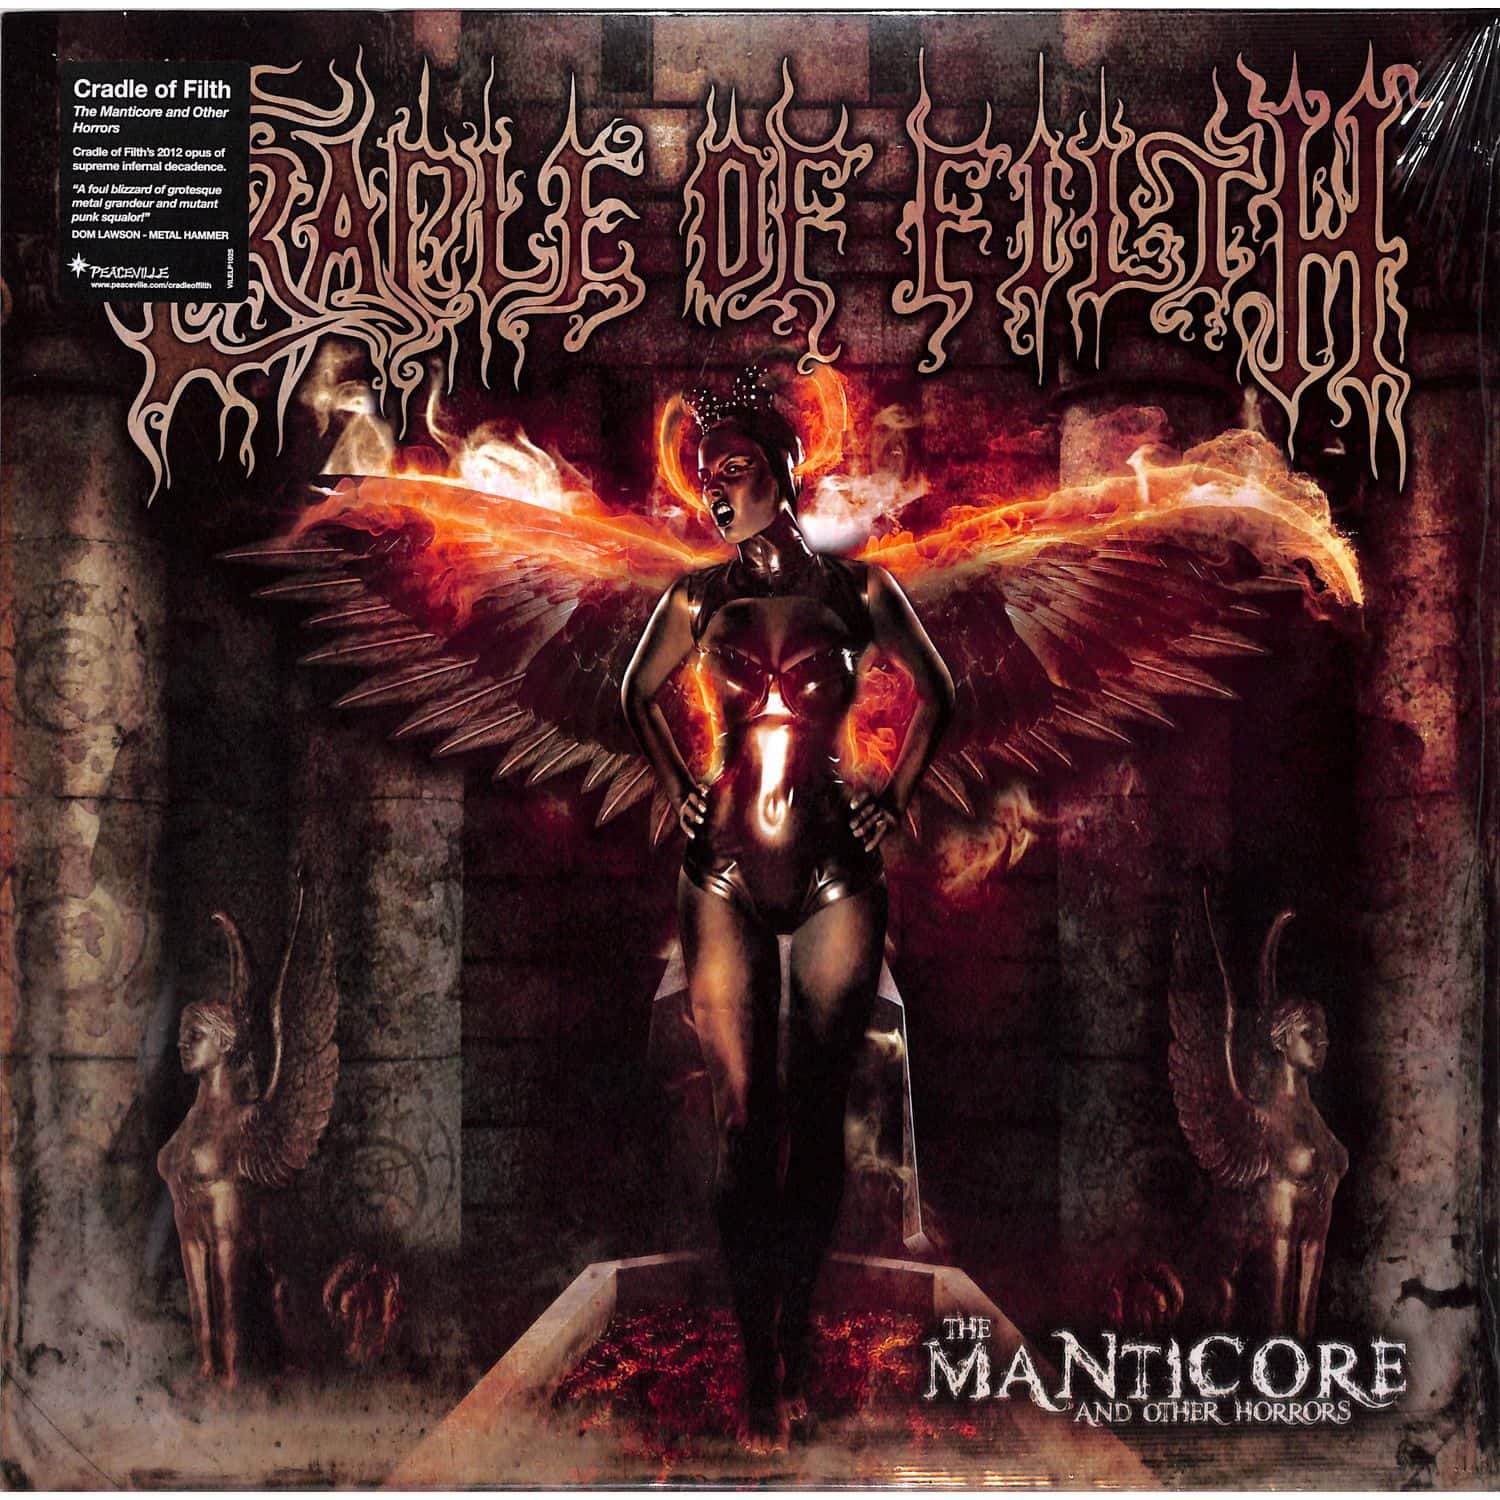 Cradle Of Filth - THE MANTICORE AND OTHER HORRORS 